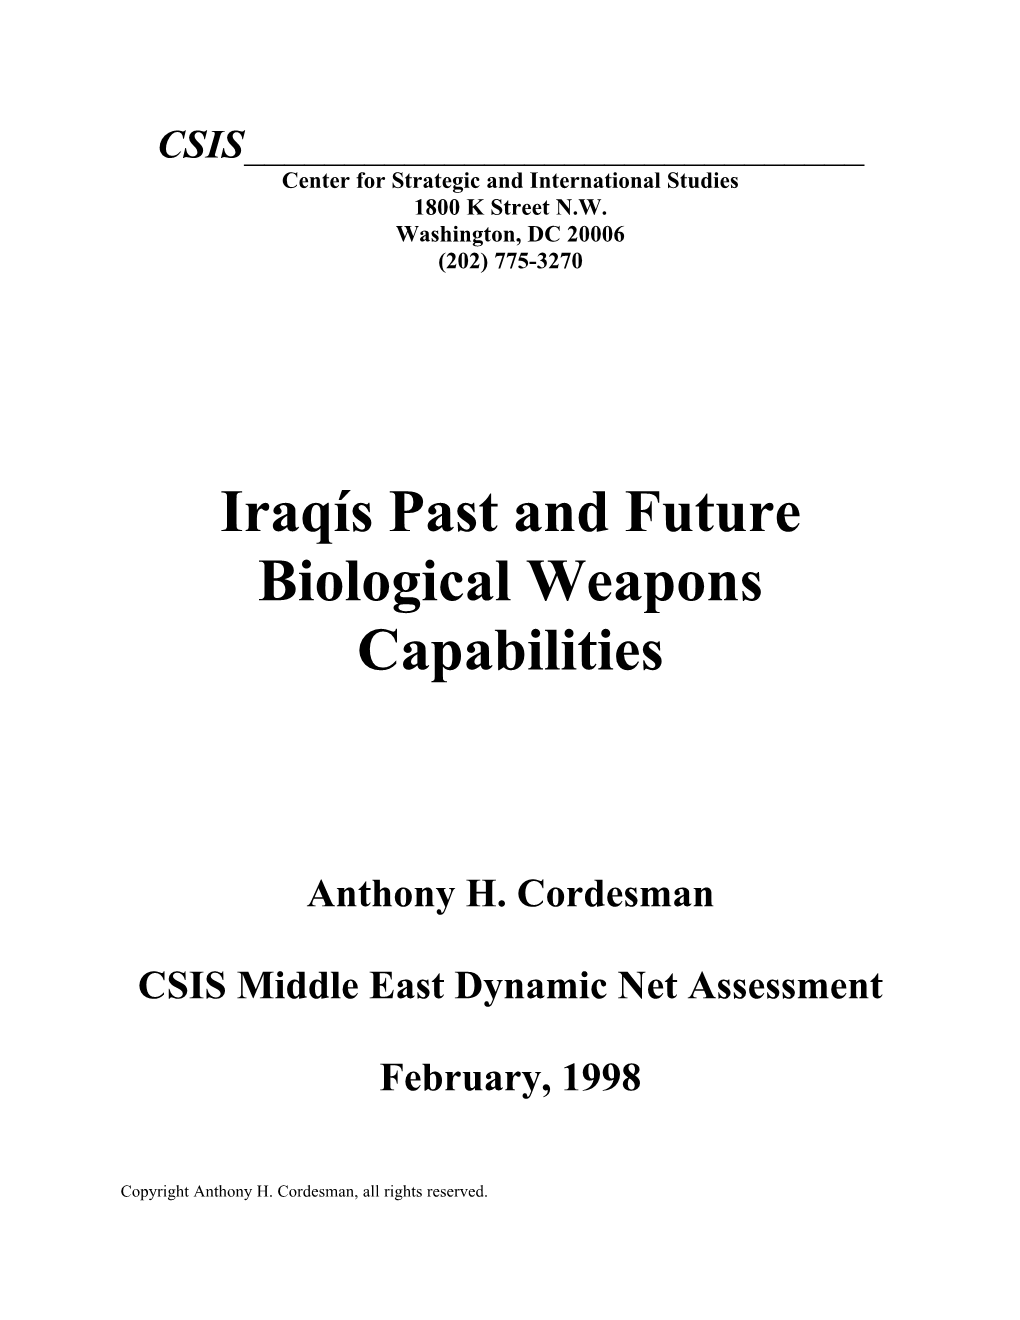 Iraqis Past and Future Biological Weapons Capabilities